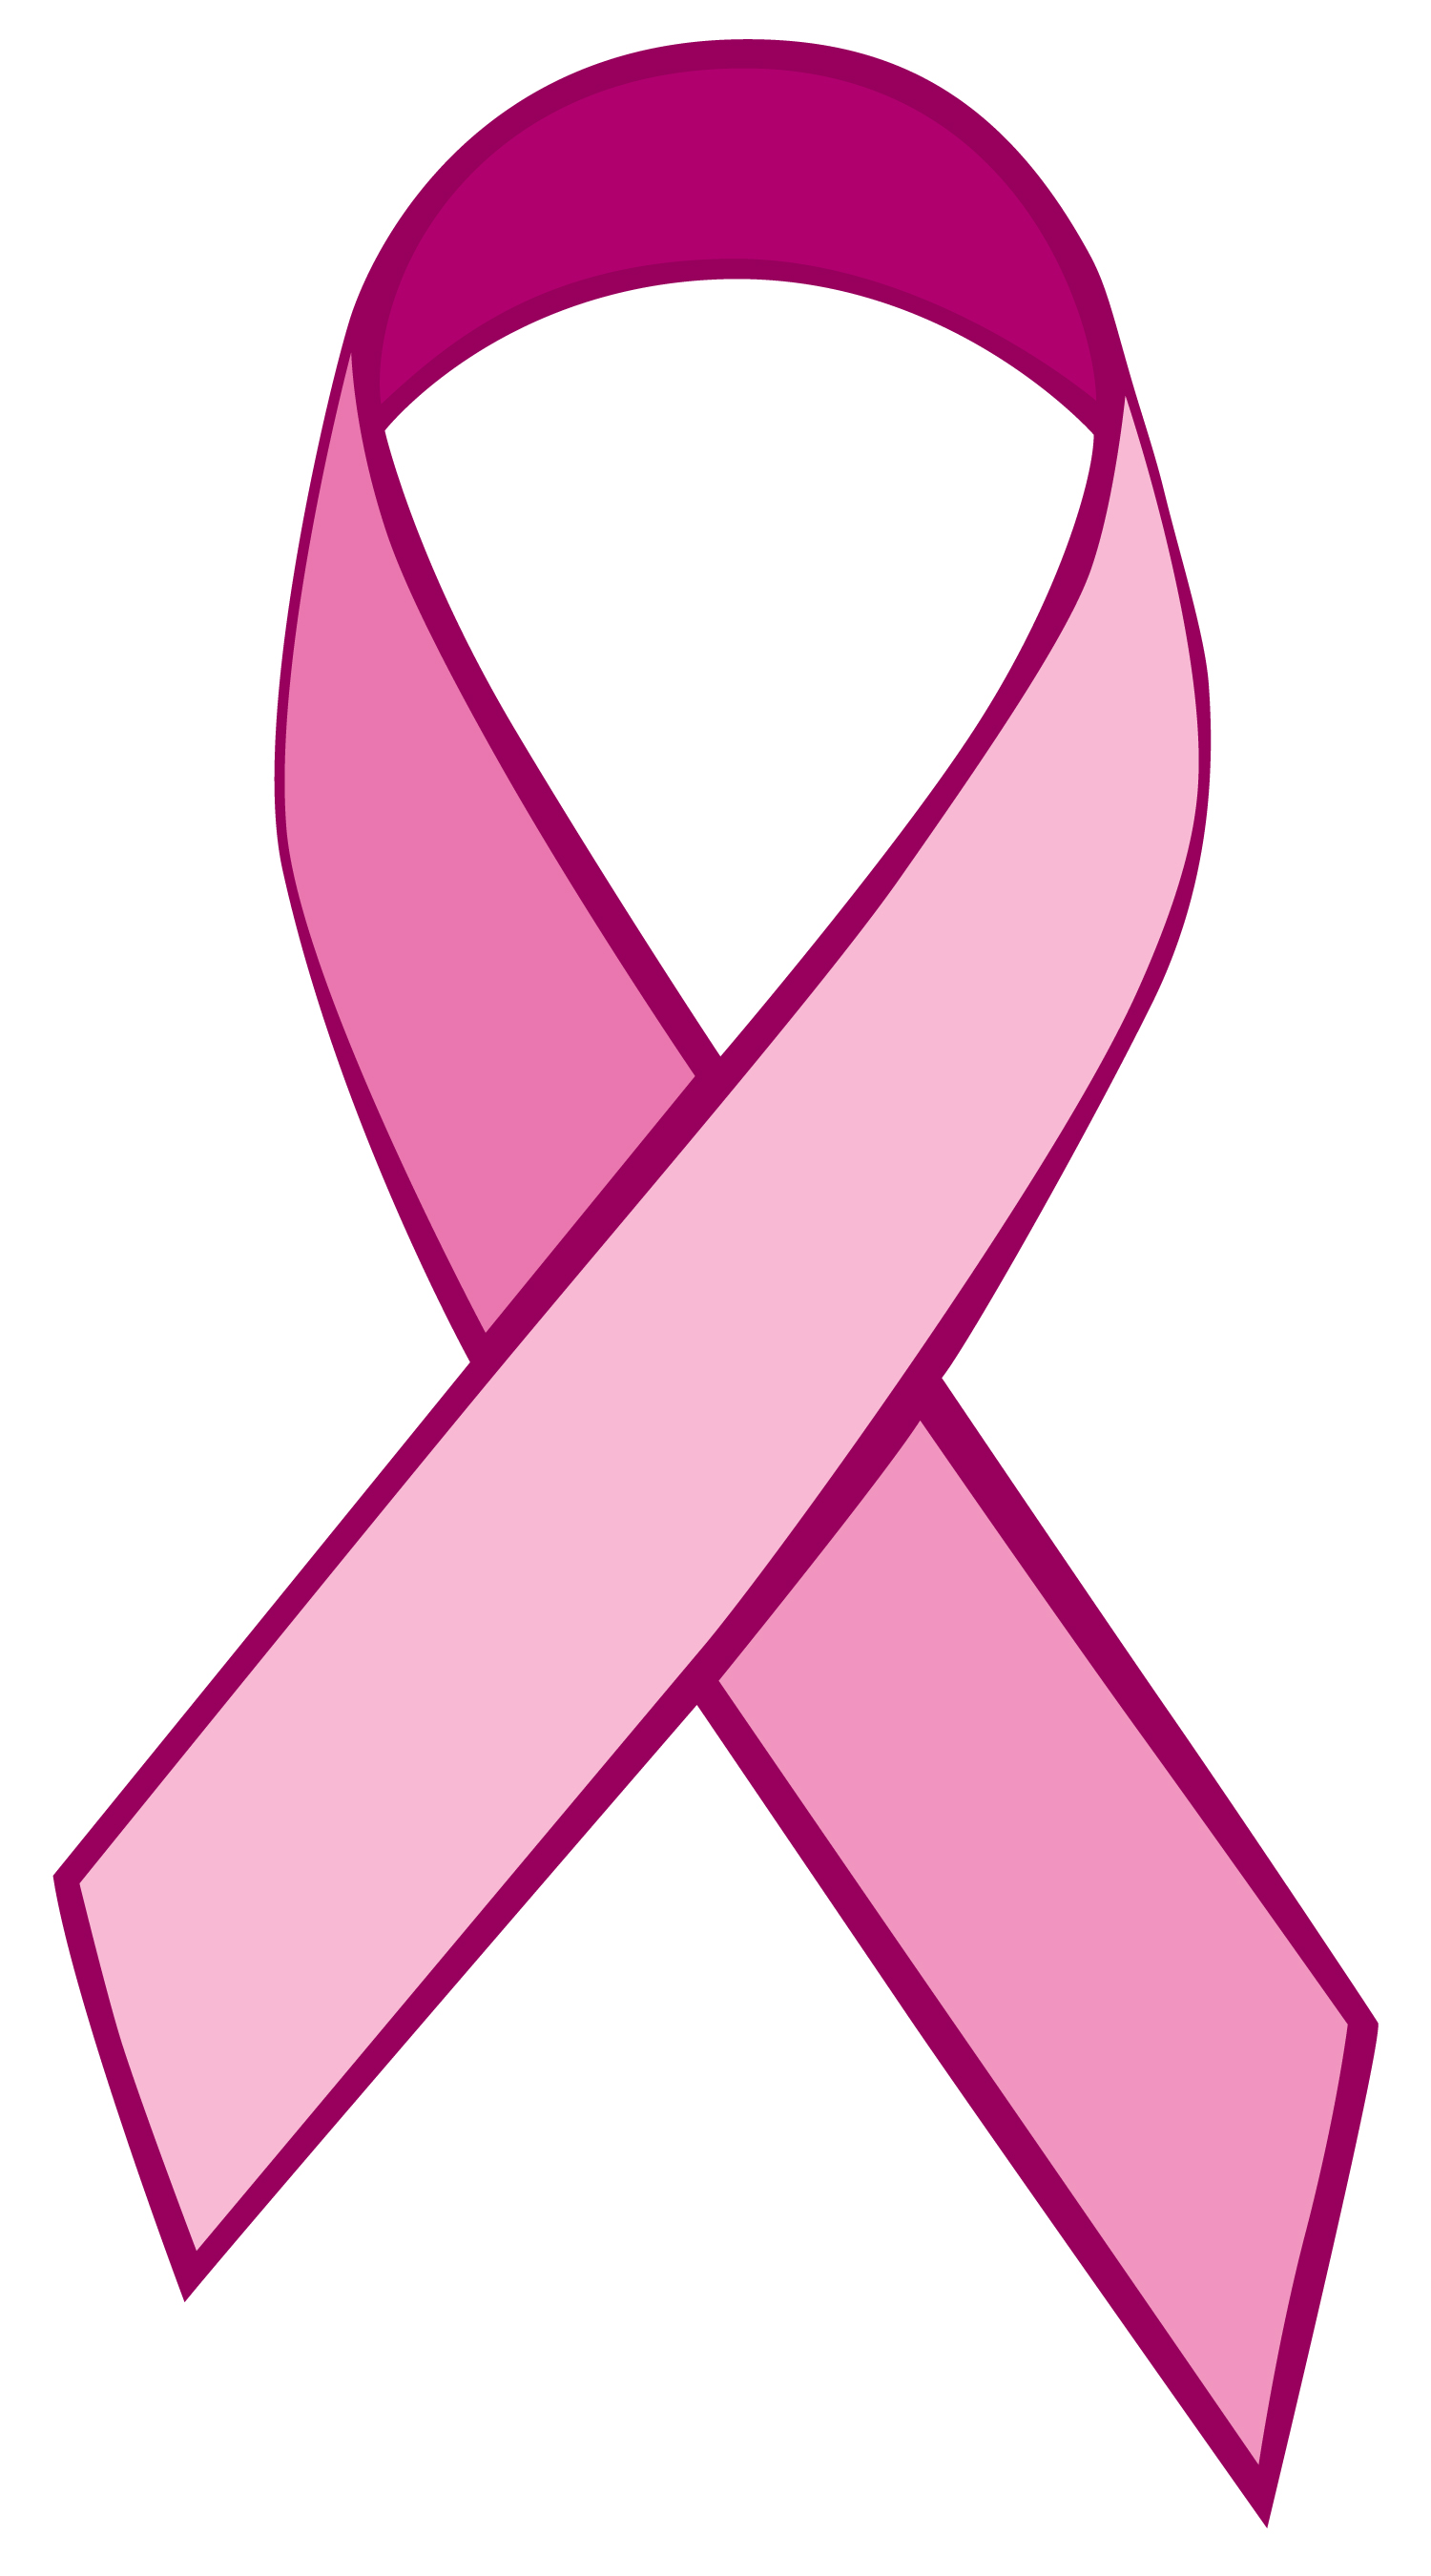  - Clipart Breast Cancer Ribbon